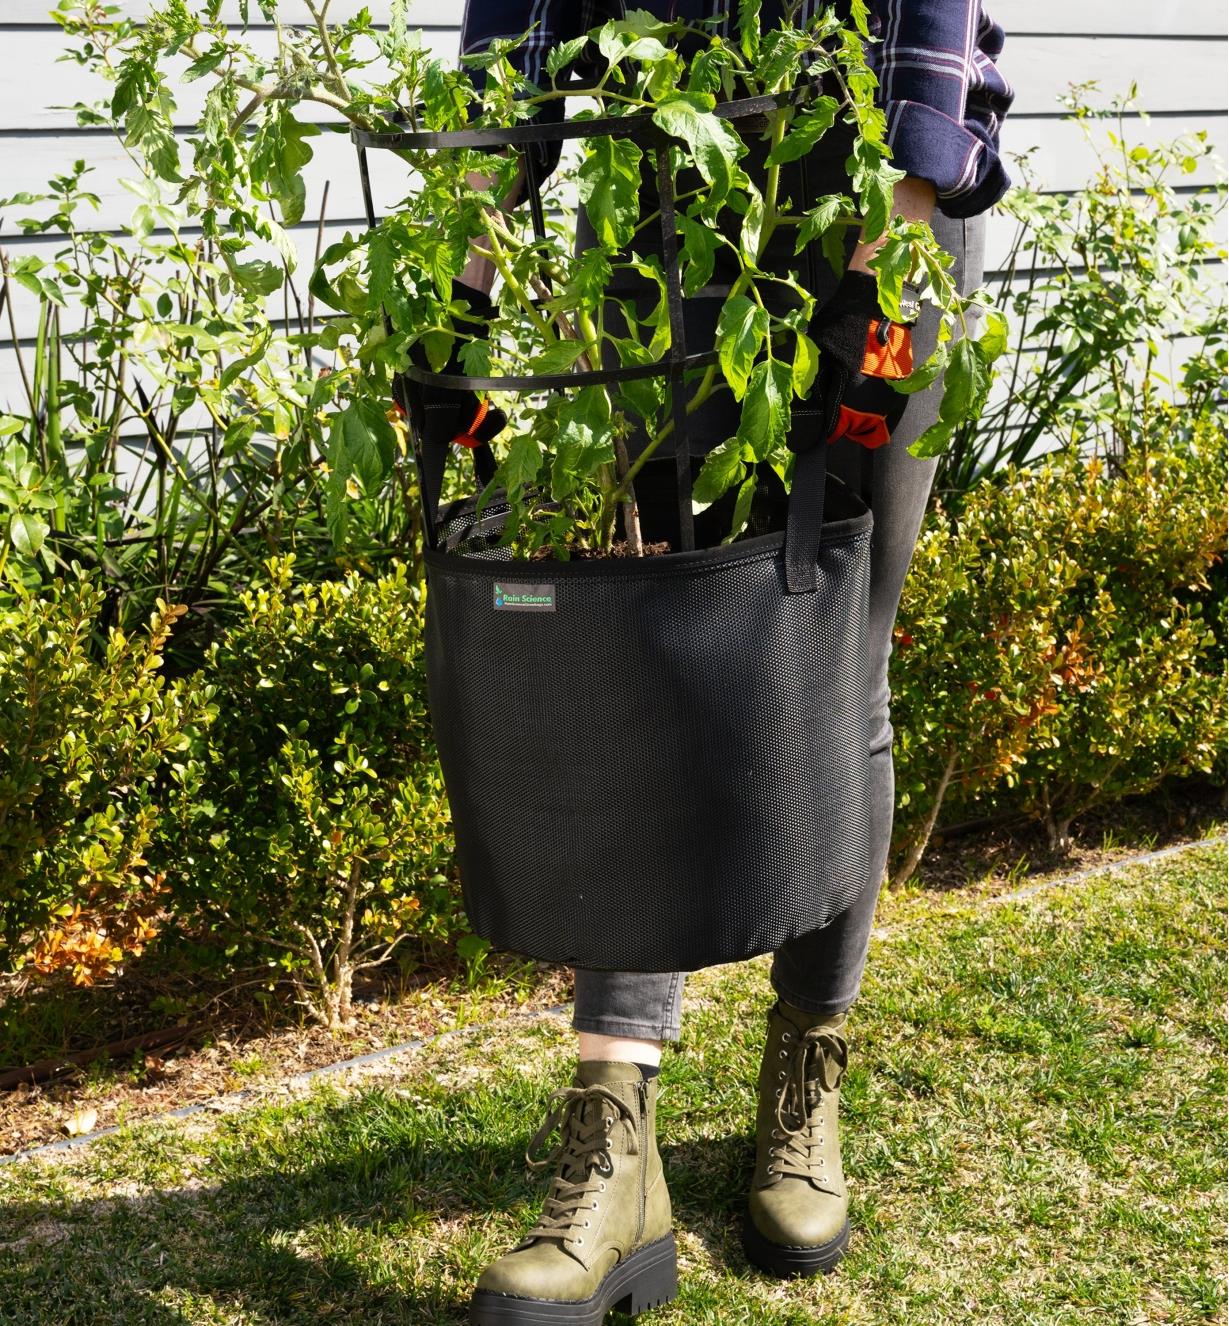 A gardener carries the 7 gallon mesh fabric pot with a tomato plant growing in it